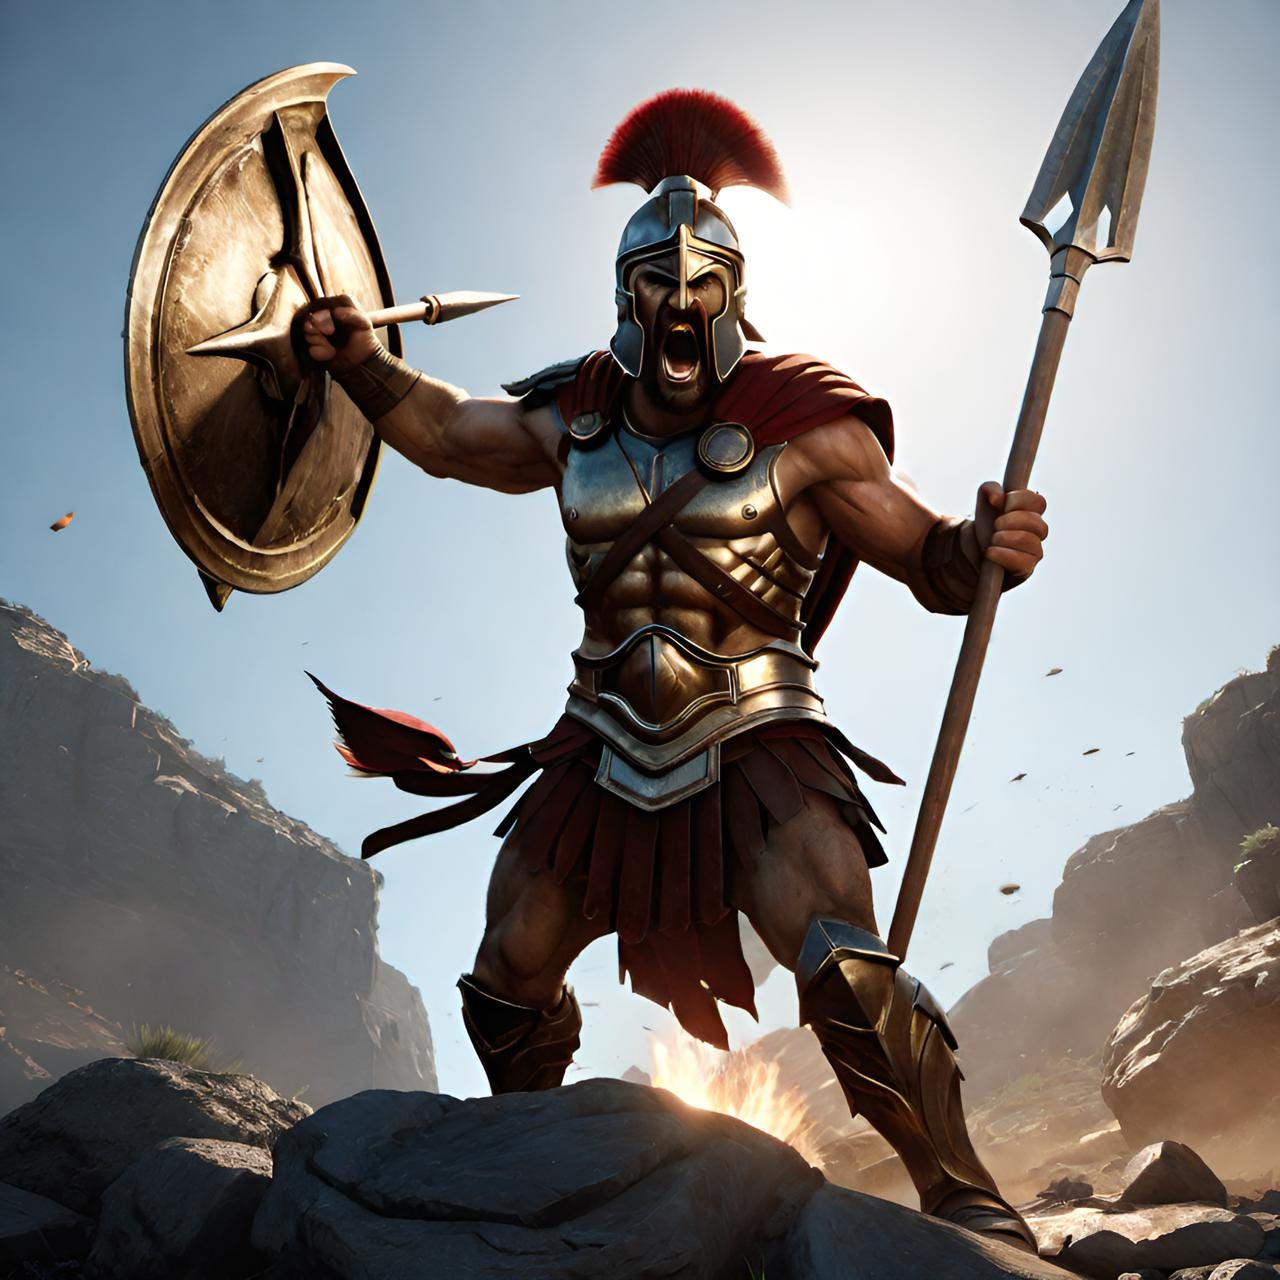 Spartan warrior holding spear and shield